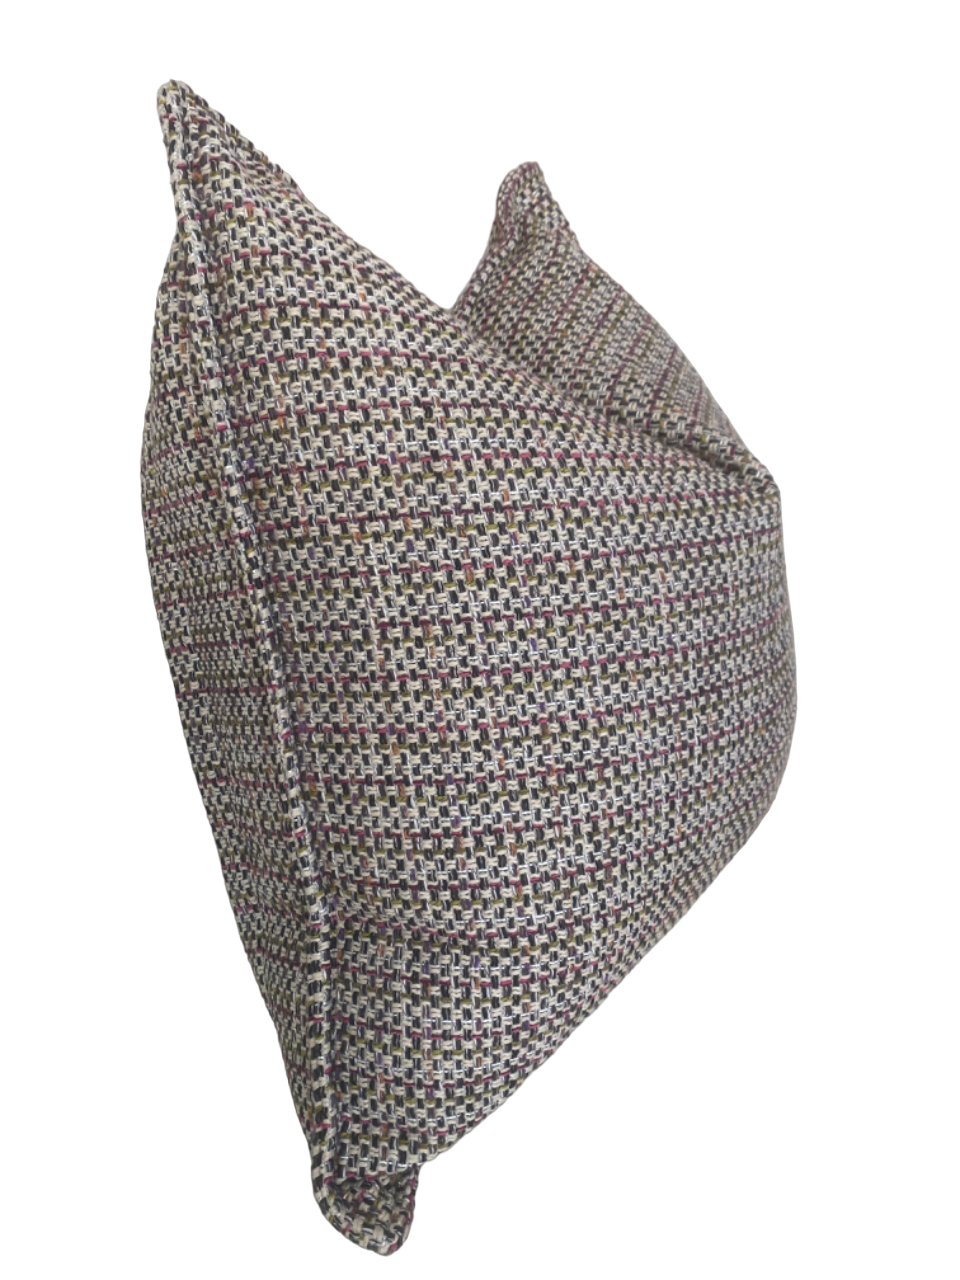 Feather Inner scatter cushion in tweed fabric, sized 60x60